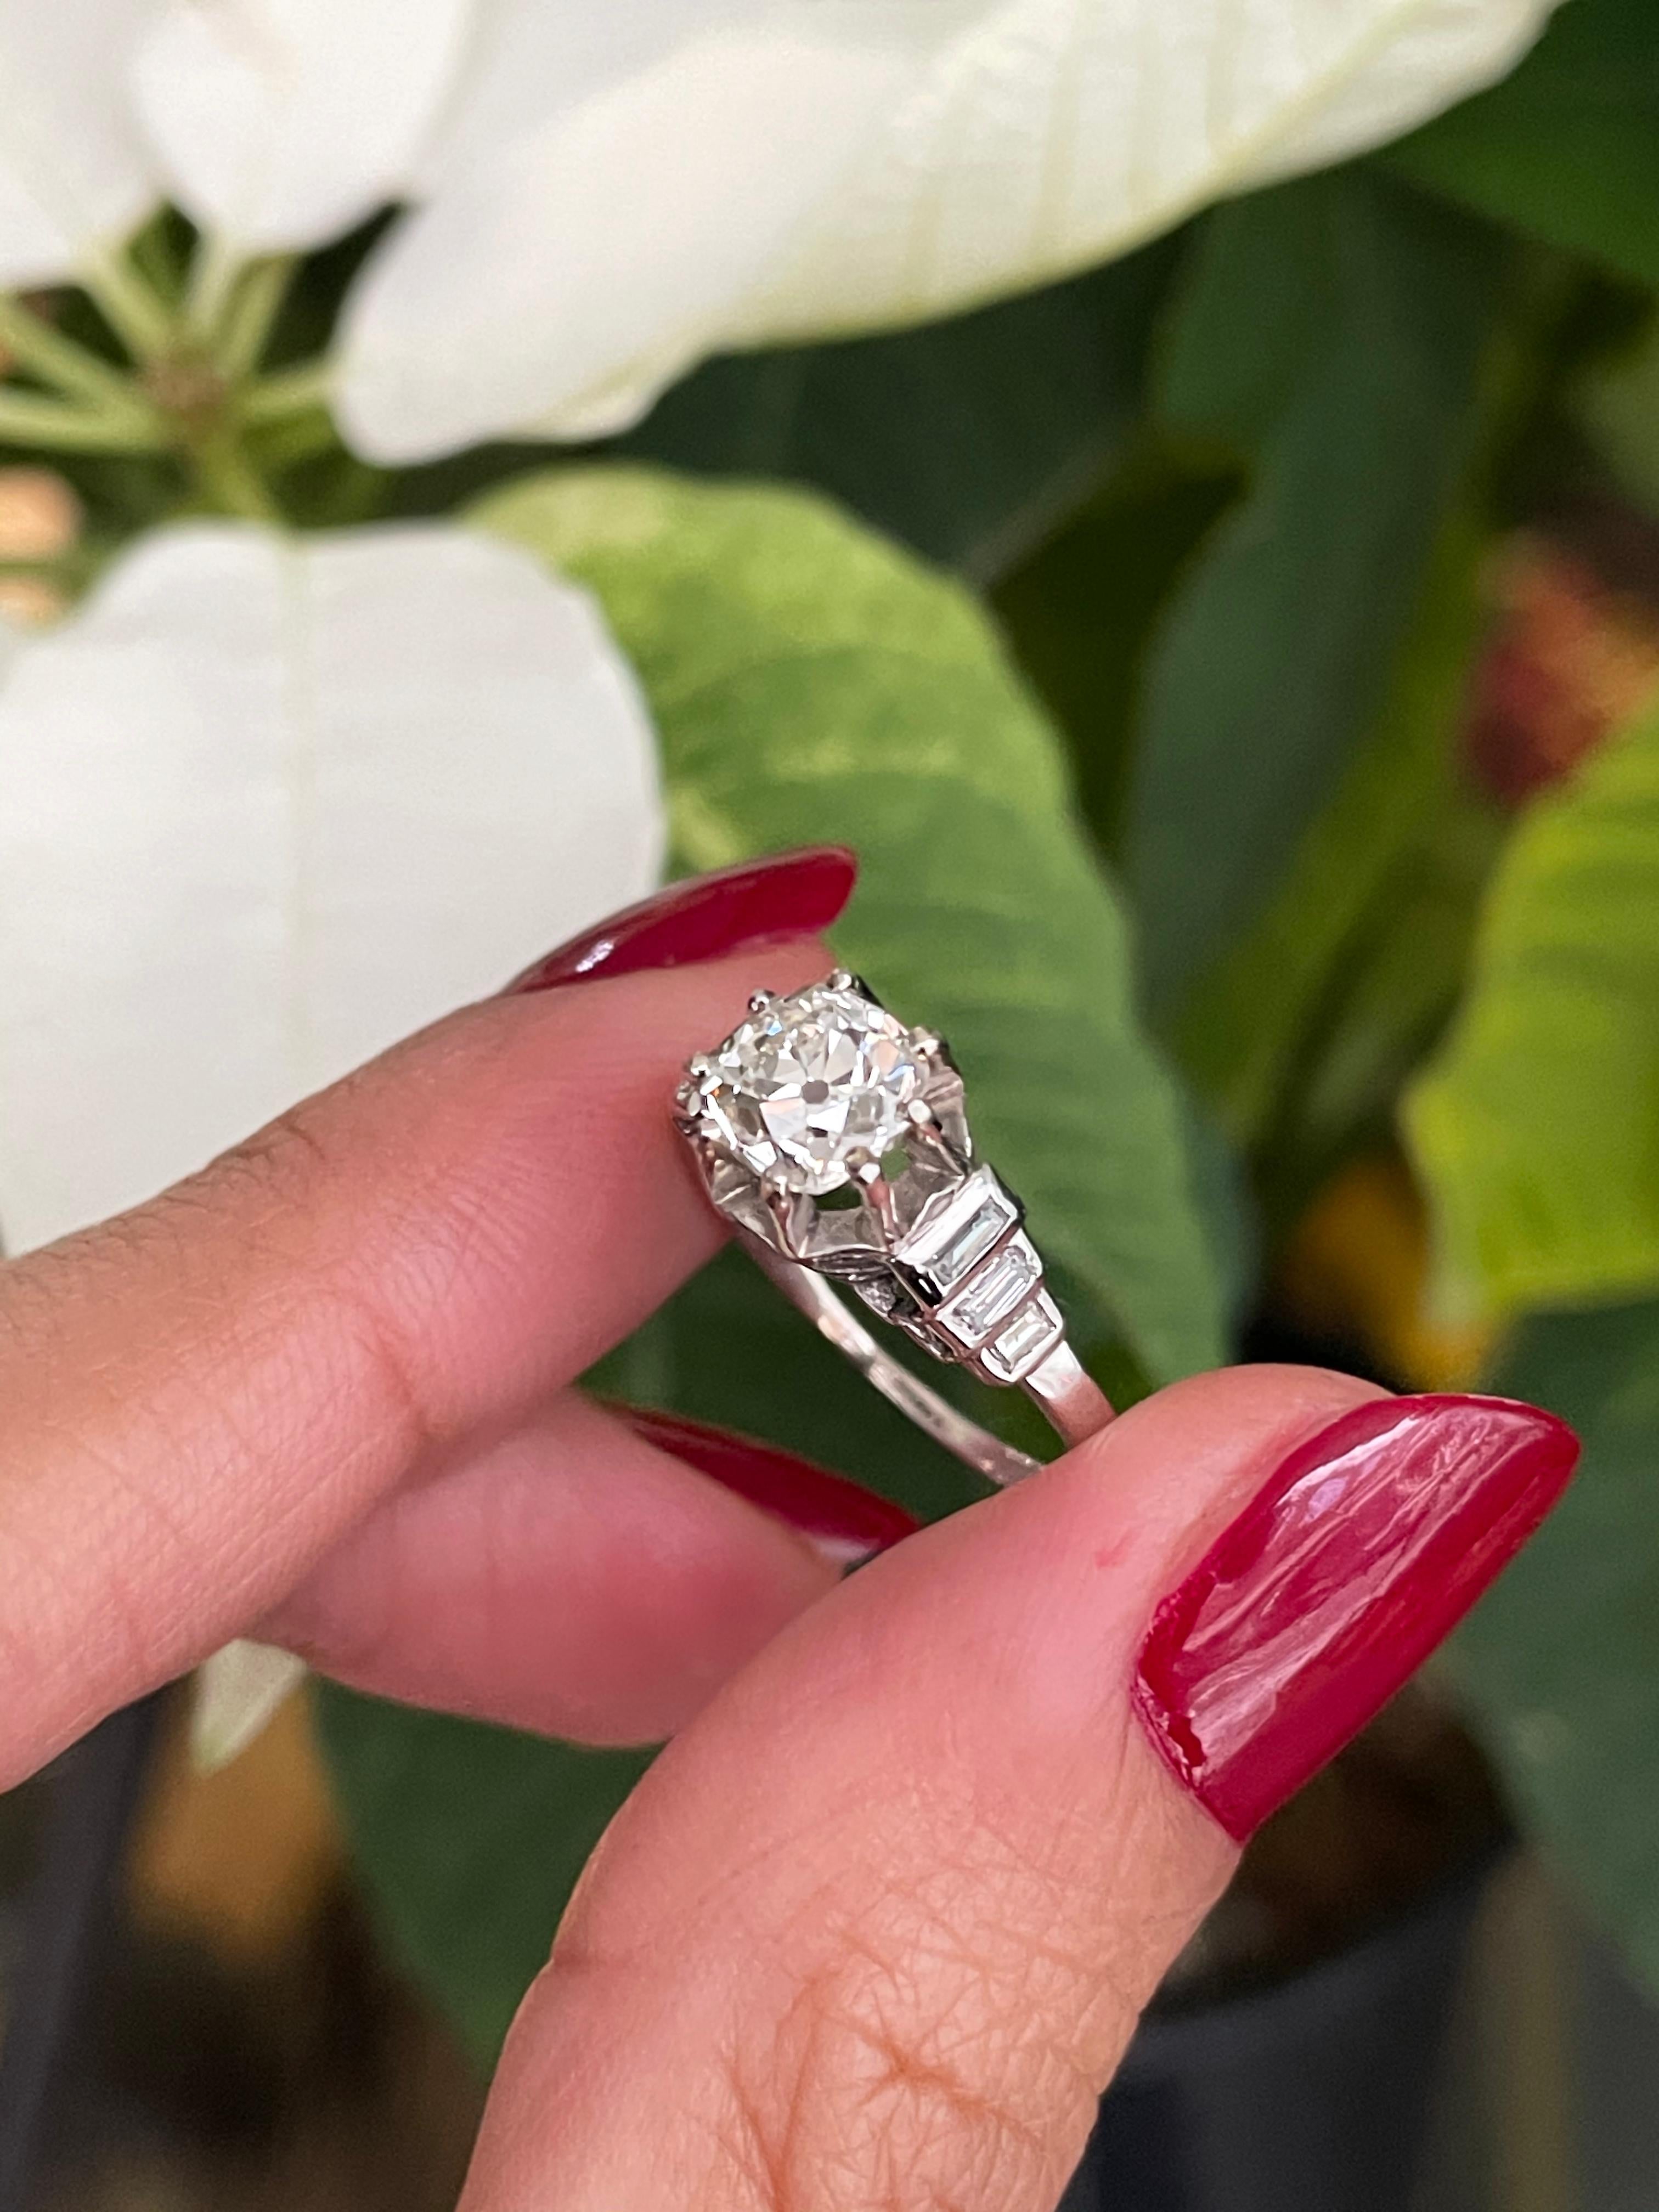 Old Mine Cut Antique Edwardian 1.15 Carat Old Cut Diamond Engagement Ring, circa 1910 For Sale